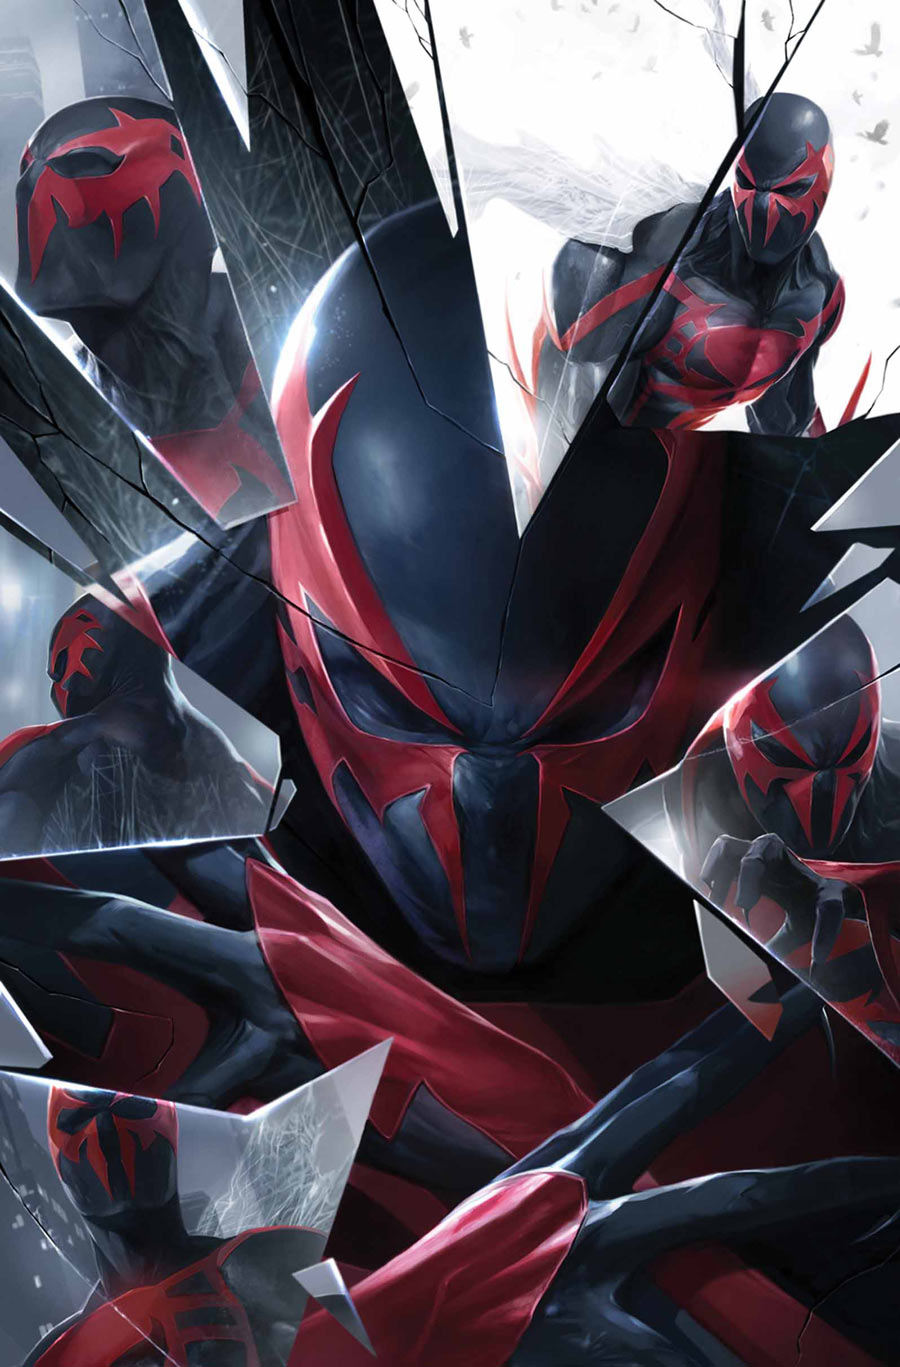 Spider Man 2099 screenshots, images and pictures - Comic Vine